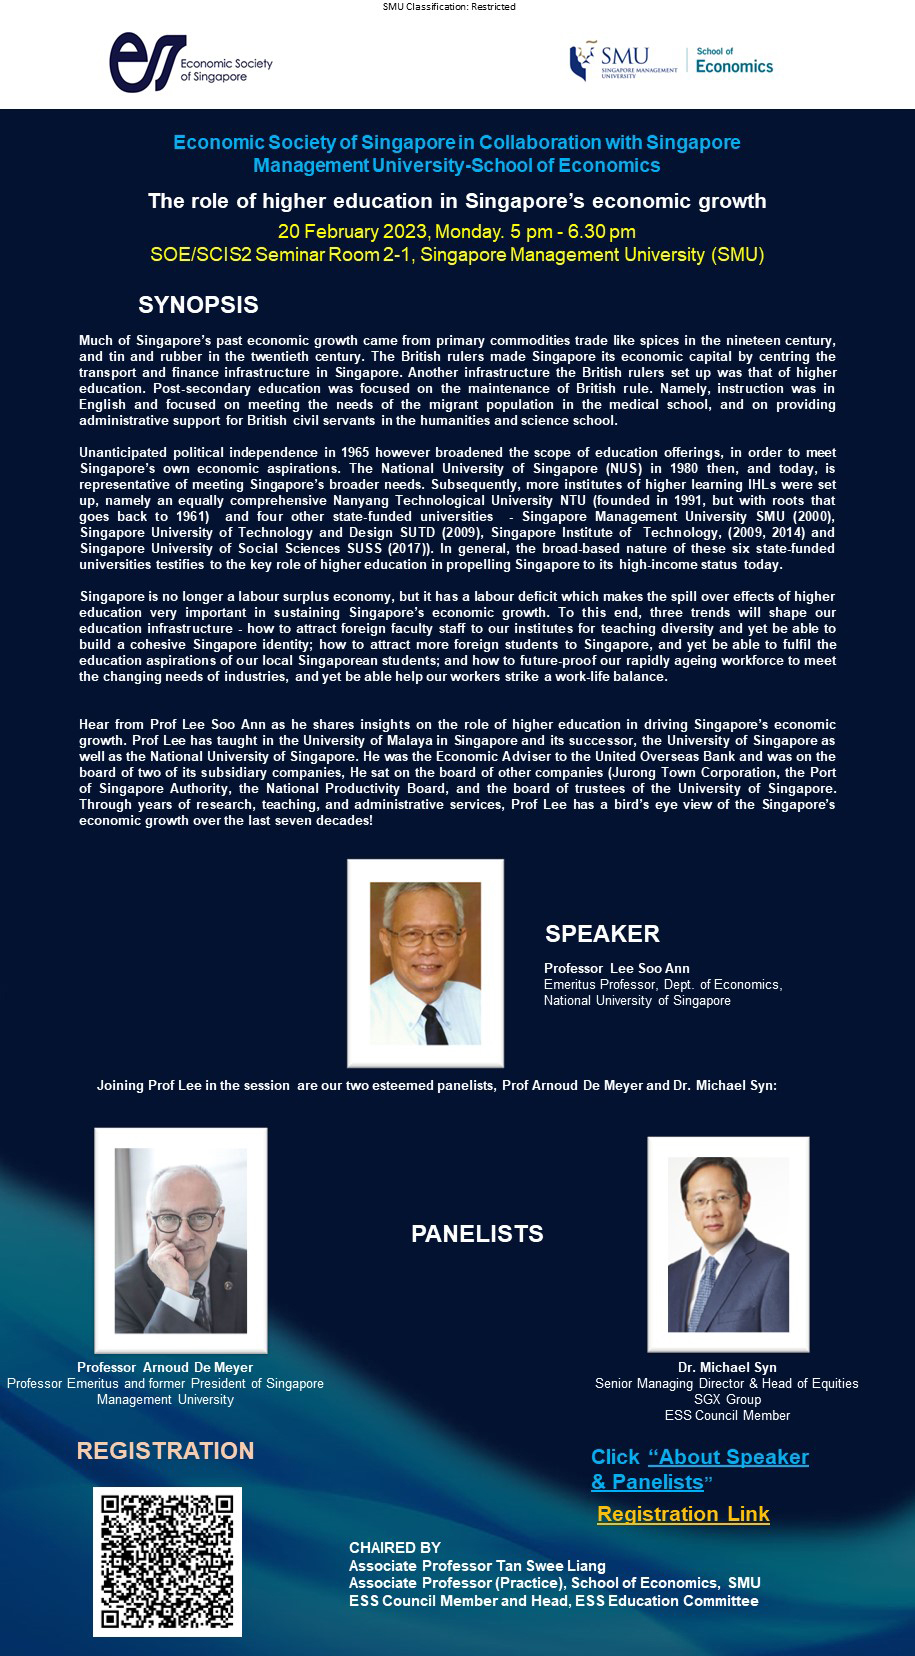 “The role of higher education in Singapore’s economic growth “